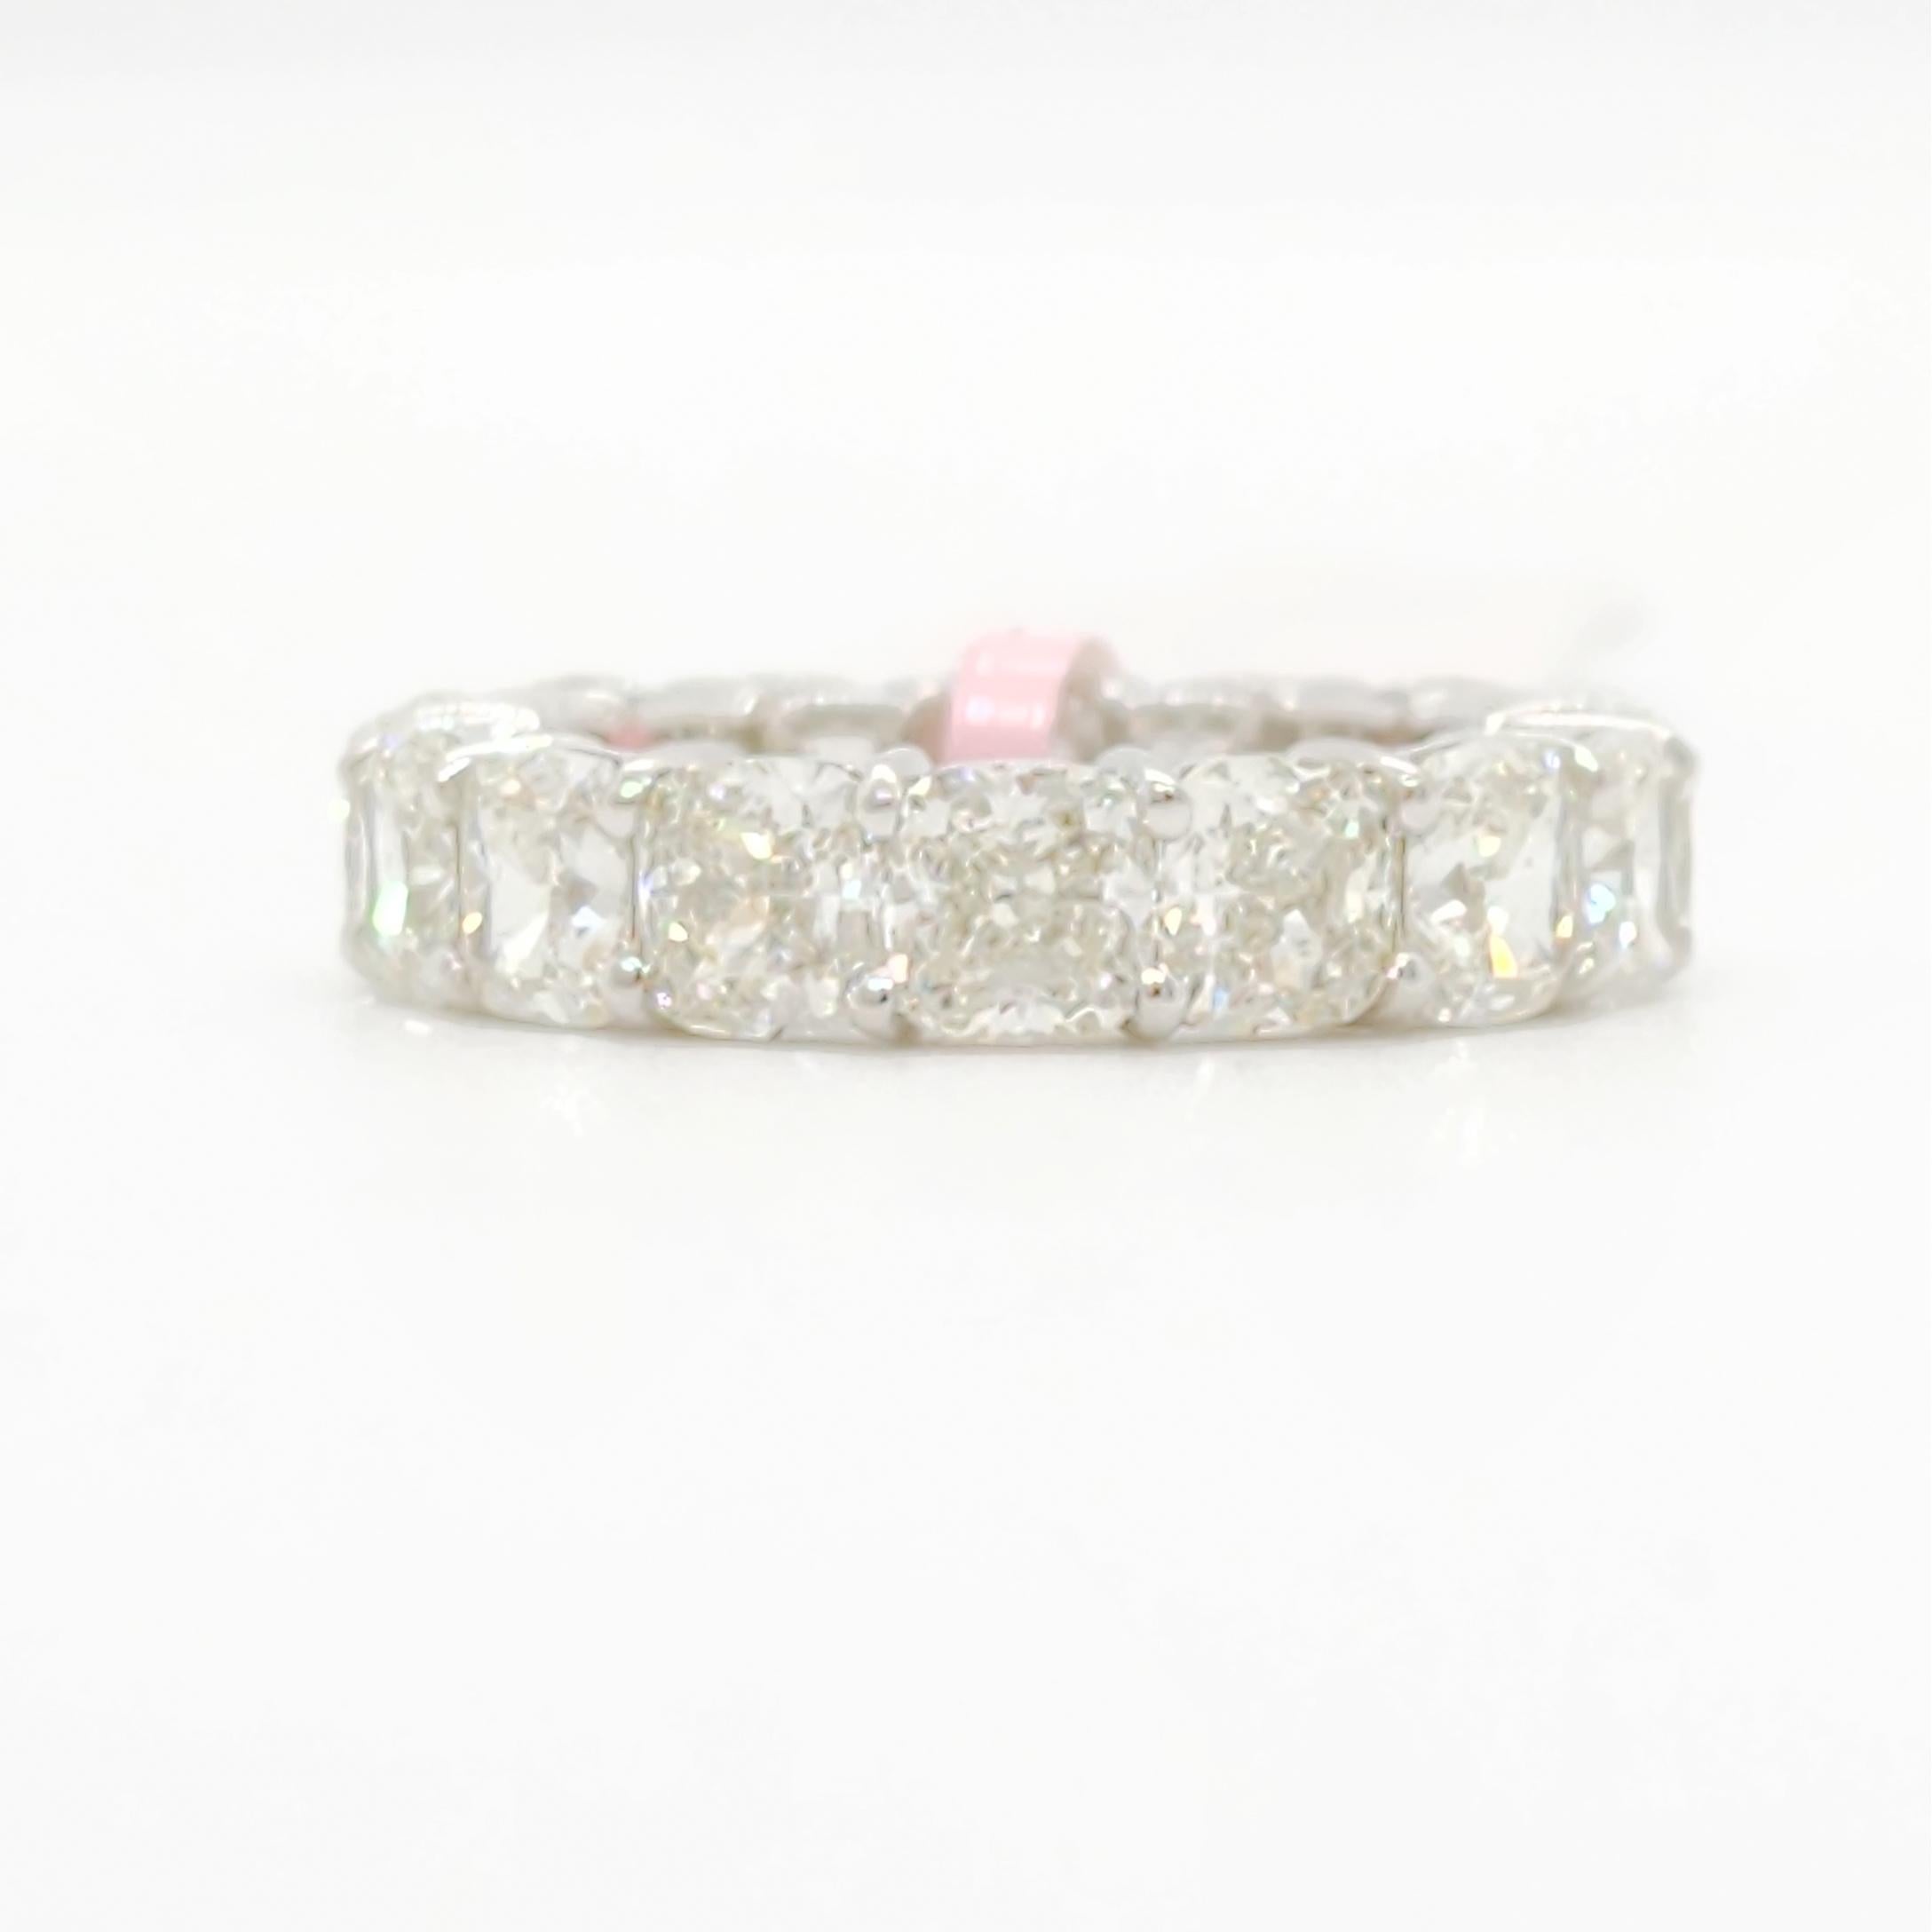 Gorgeous 8.11 ct. cushion cut eternity band with 16 diamonds that are J color and VVS1 to SI1 in clarity.  Handmade in 18k white gold.  All stones are GIA certified.  Ring size 6.5.